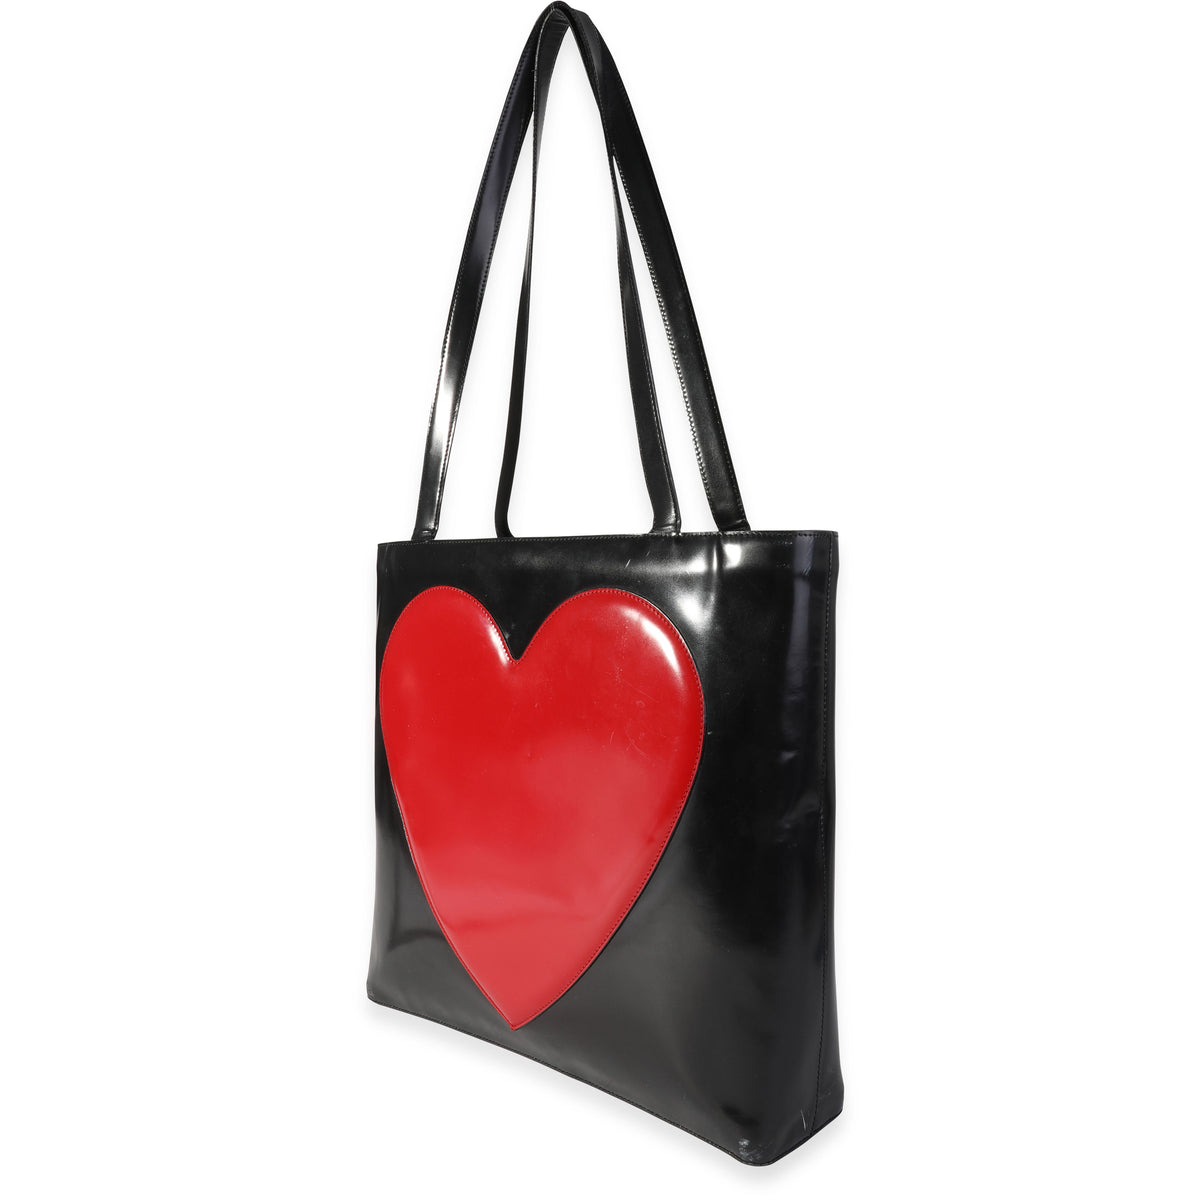 Moschino Black and Red Leather Heart Shoulder Bag